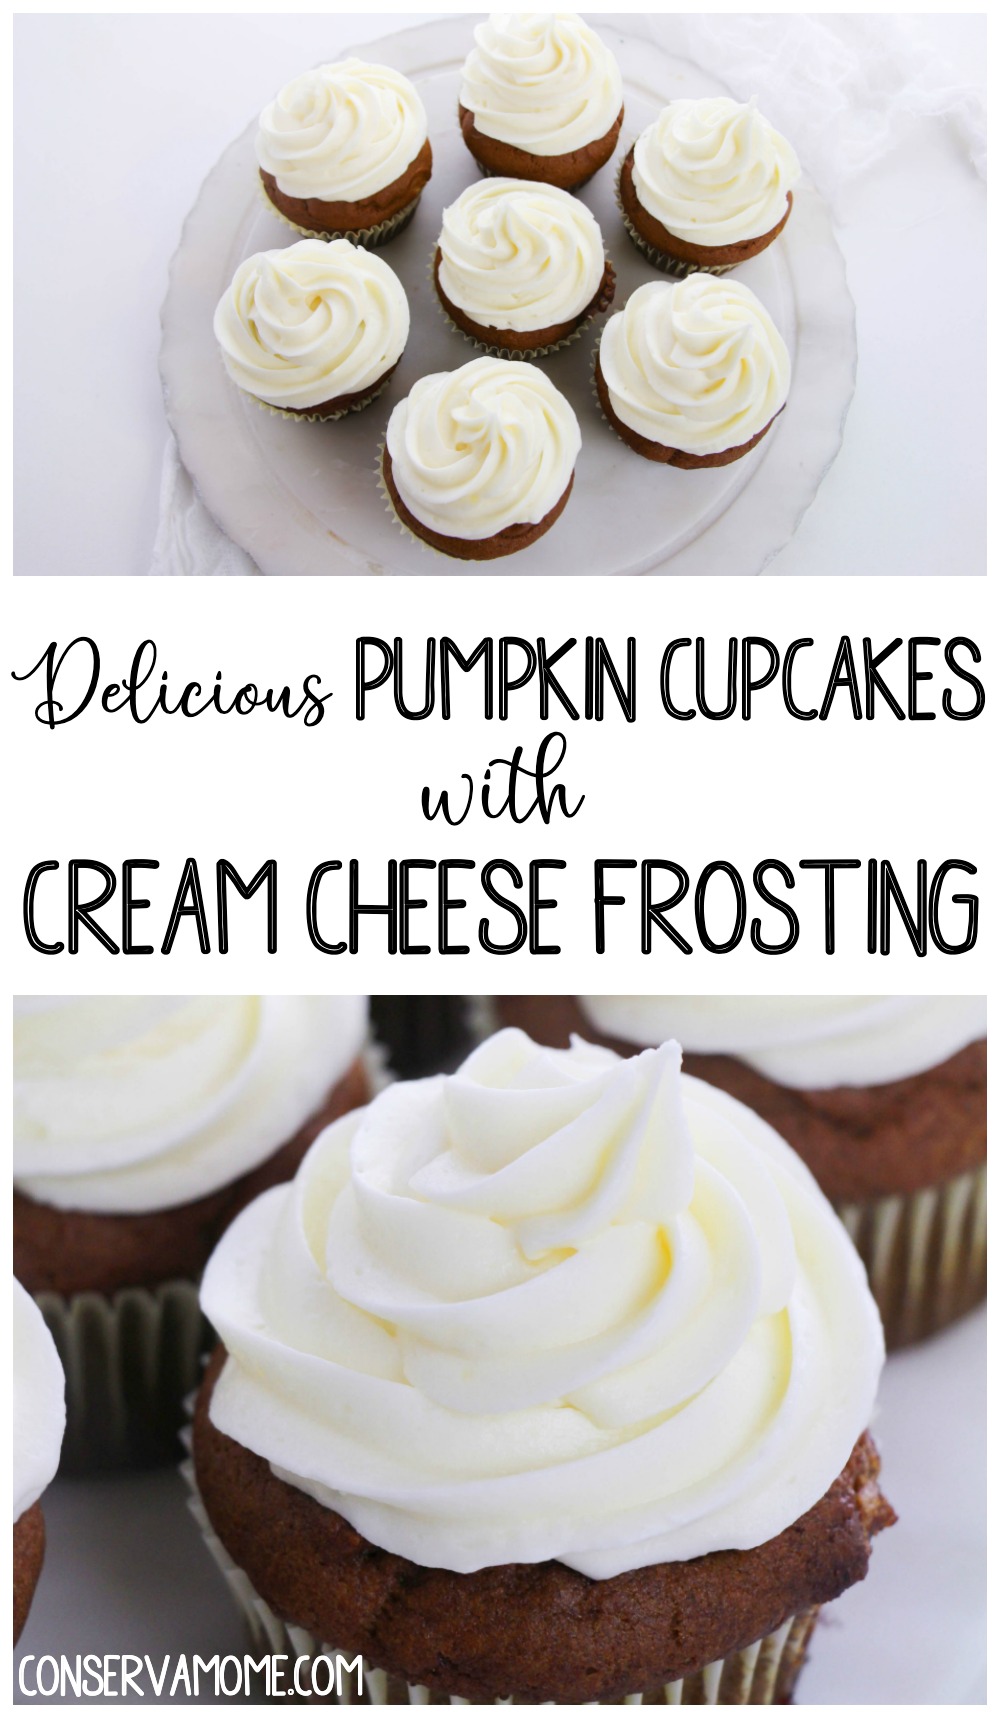 Delicious pumpkin cupcakes with cream cheese frosting